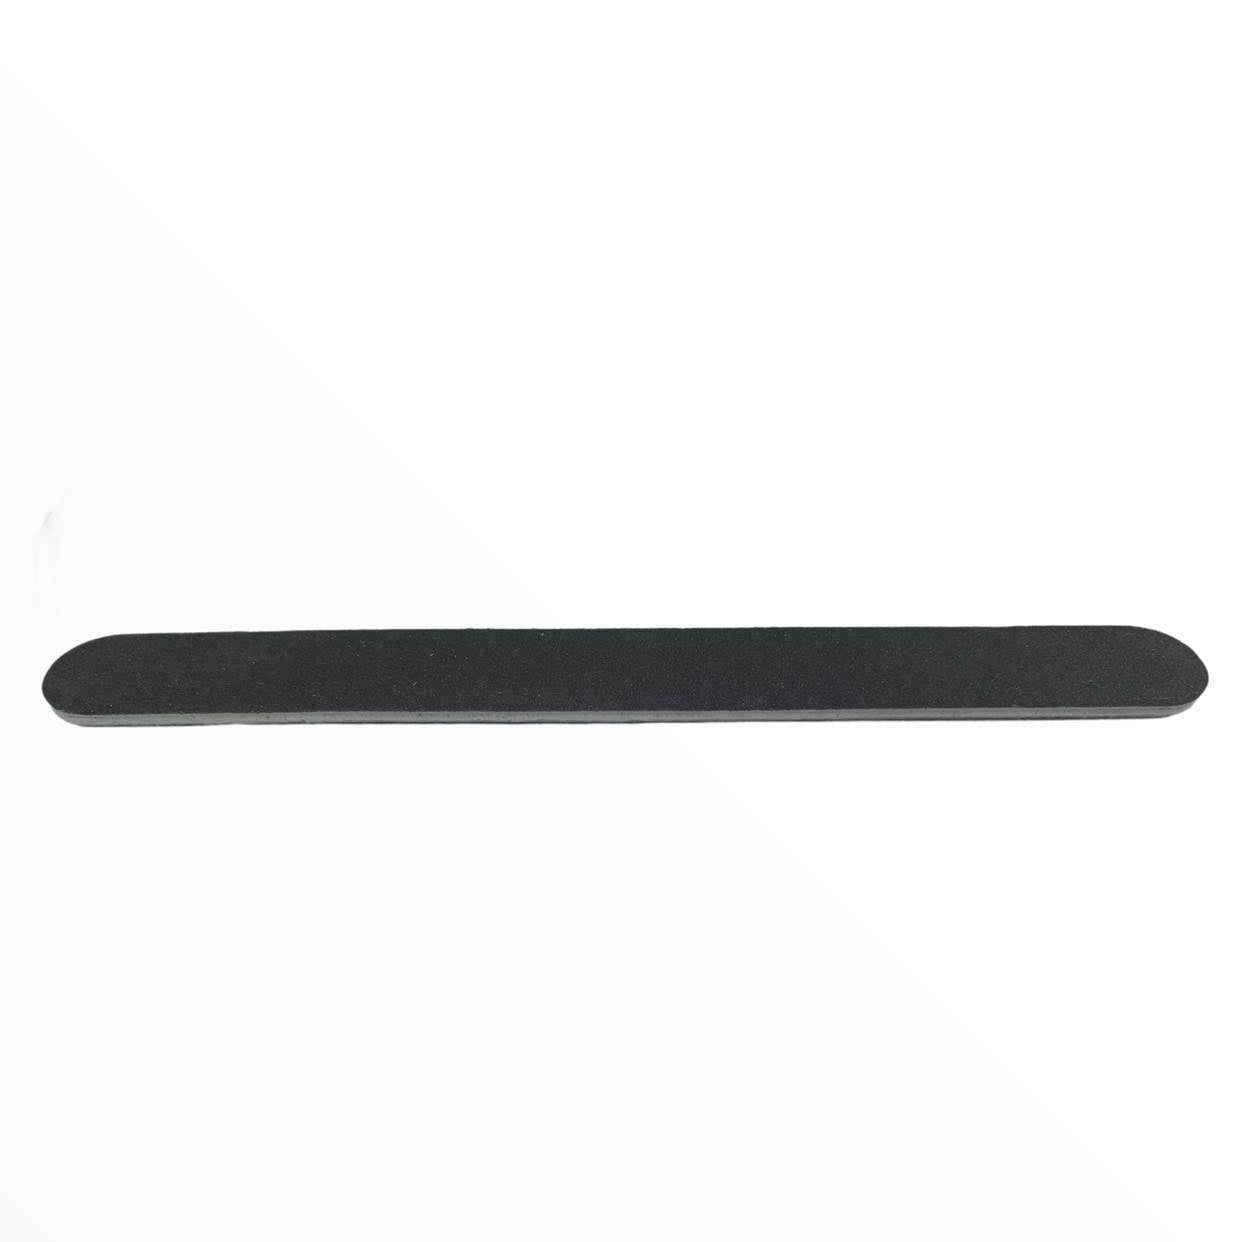 Professional Nail File 100/180 Grit